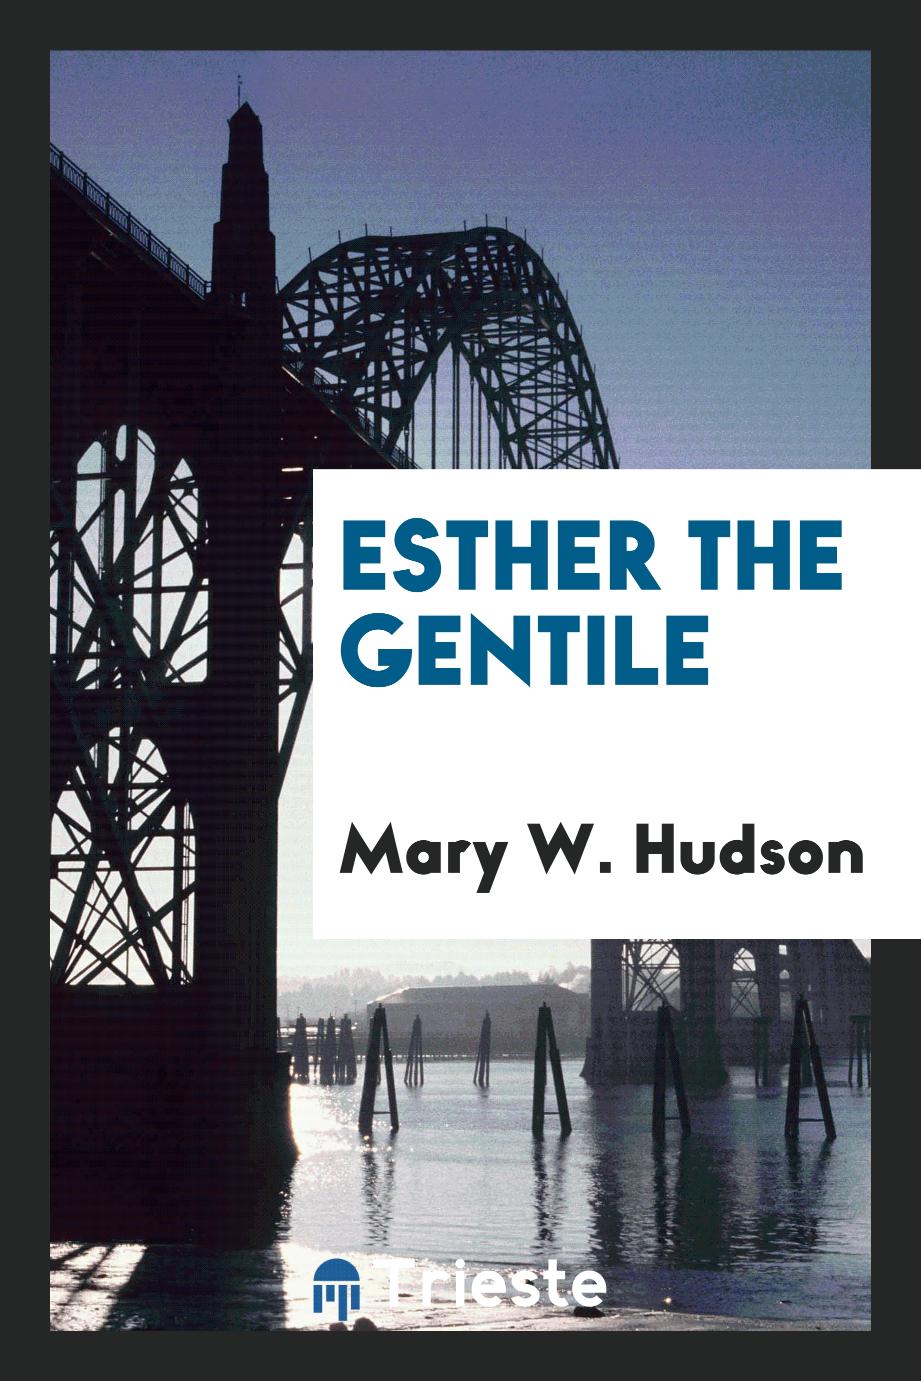 Esther the Gentile